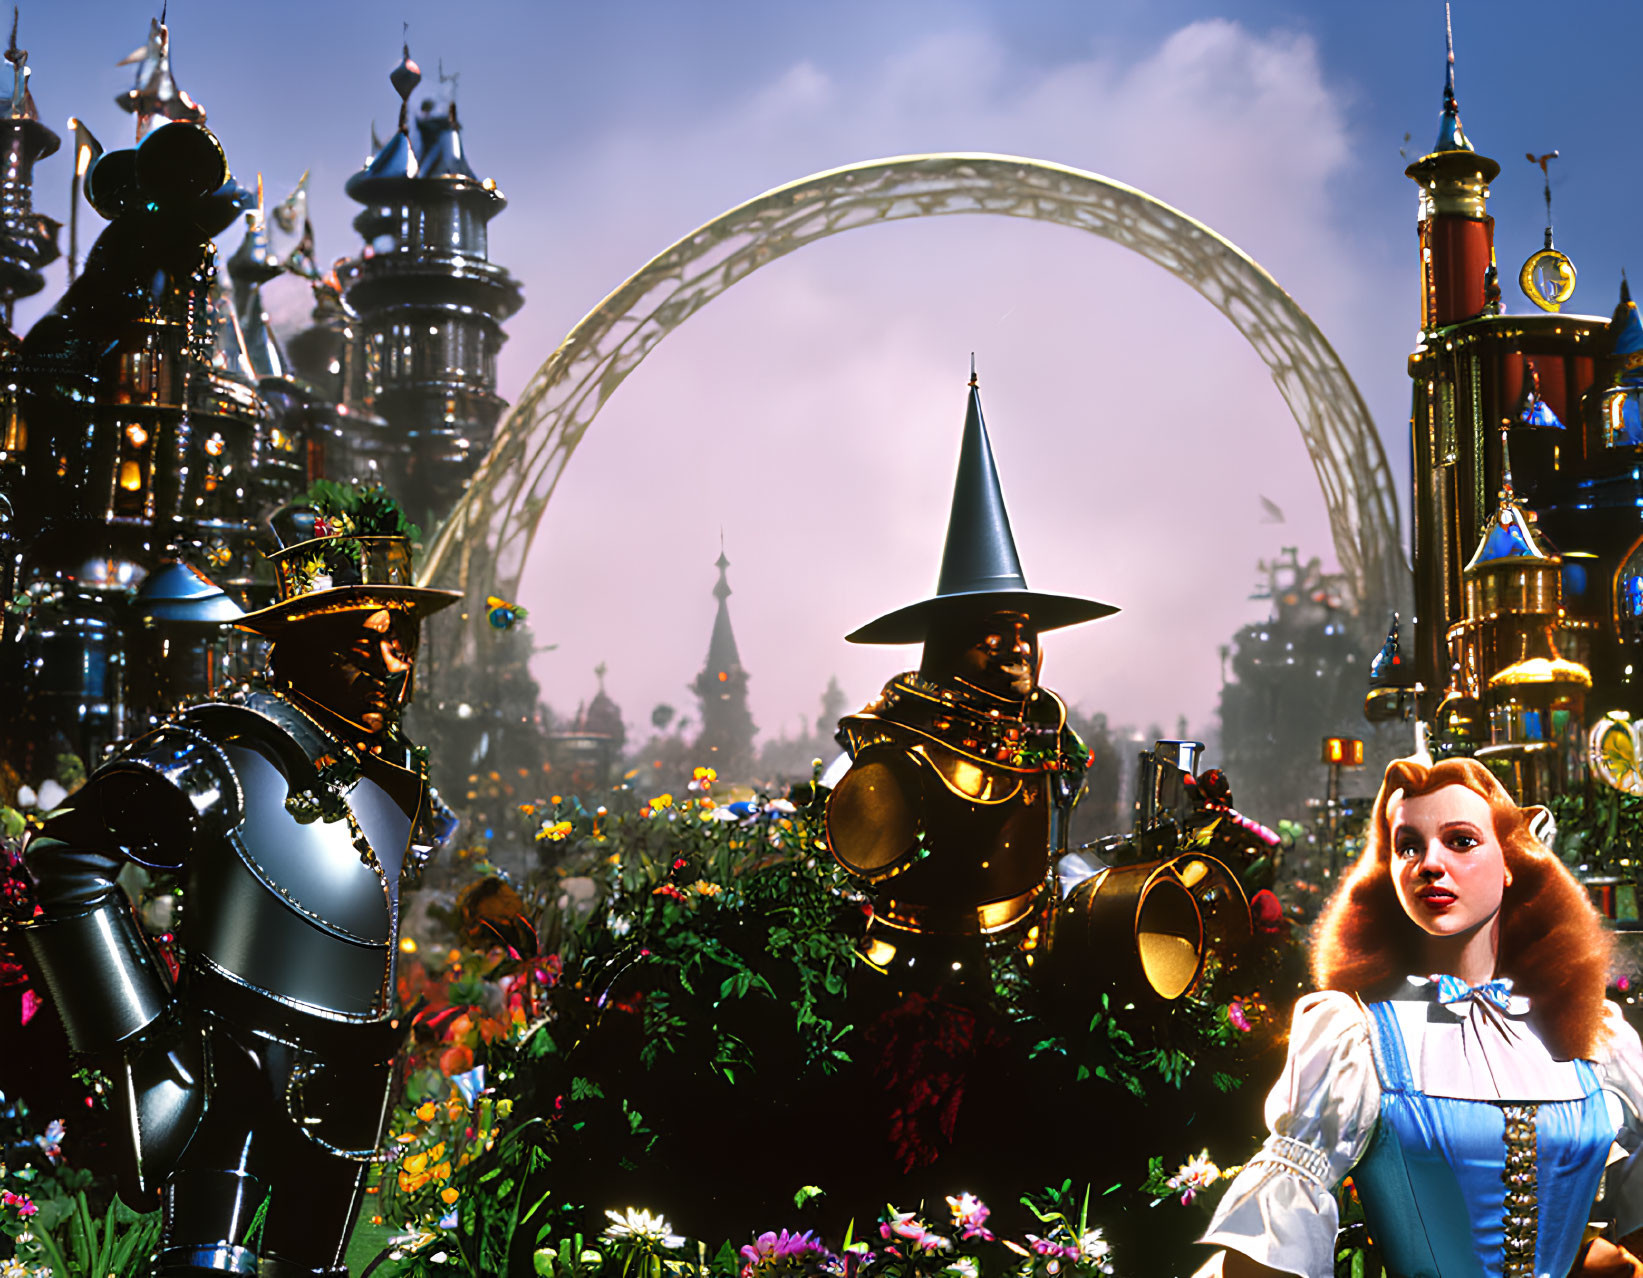 Vibrant fantasy scene with robotic Tin Man, Scarecrow, and Dorothy surrounded by colorful flowers